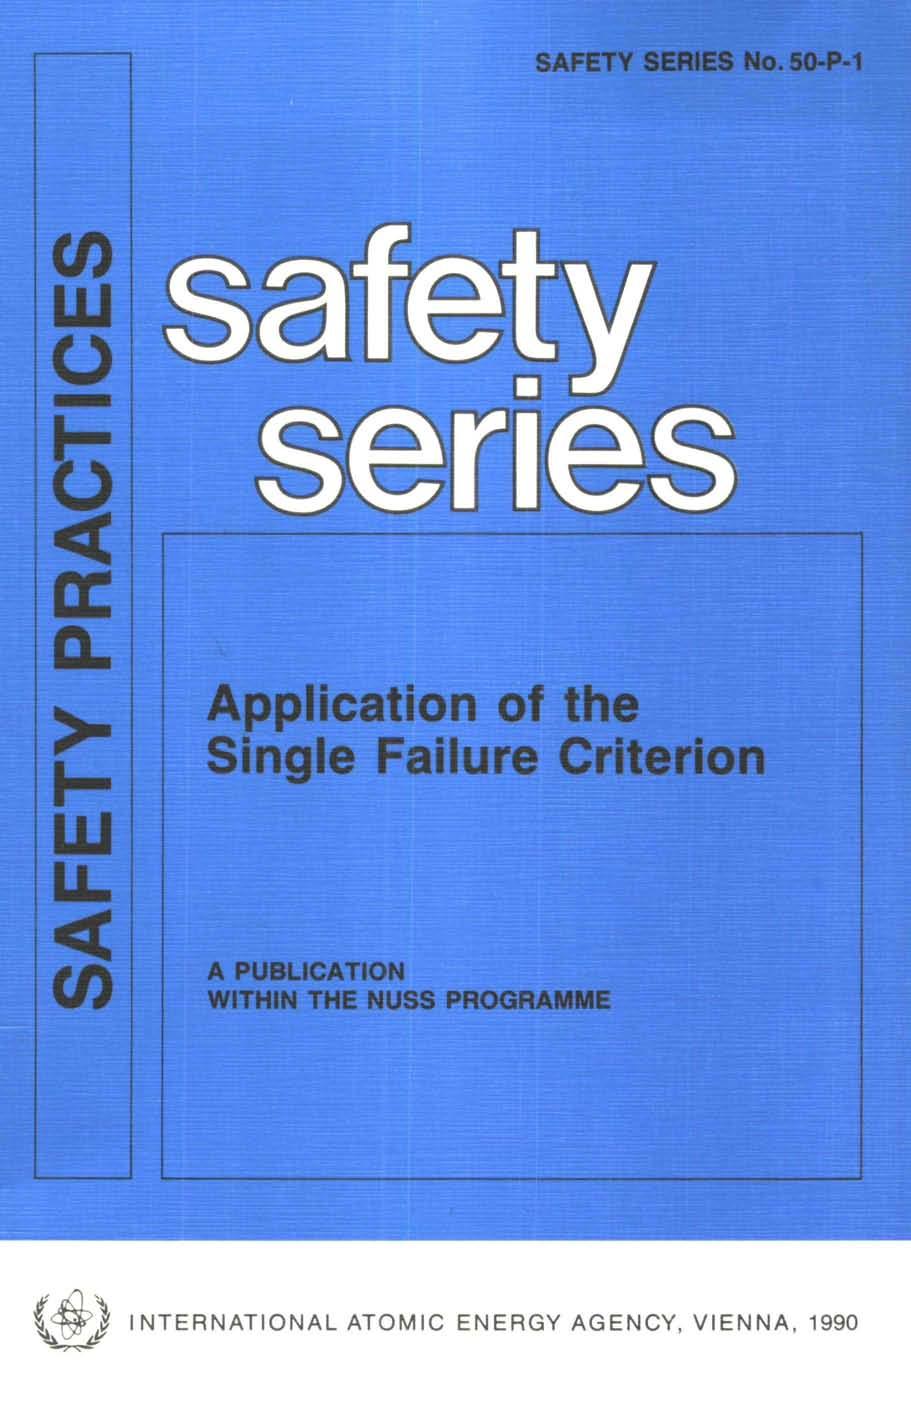 SAFETY SERIES No.